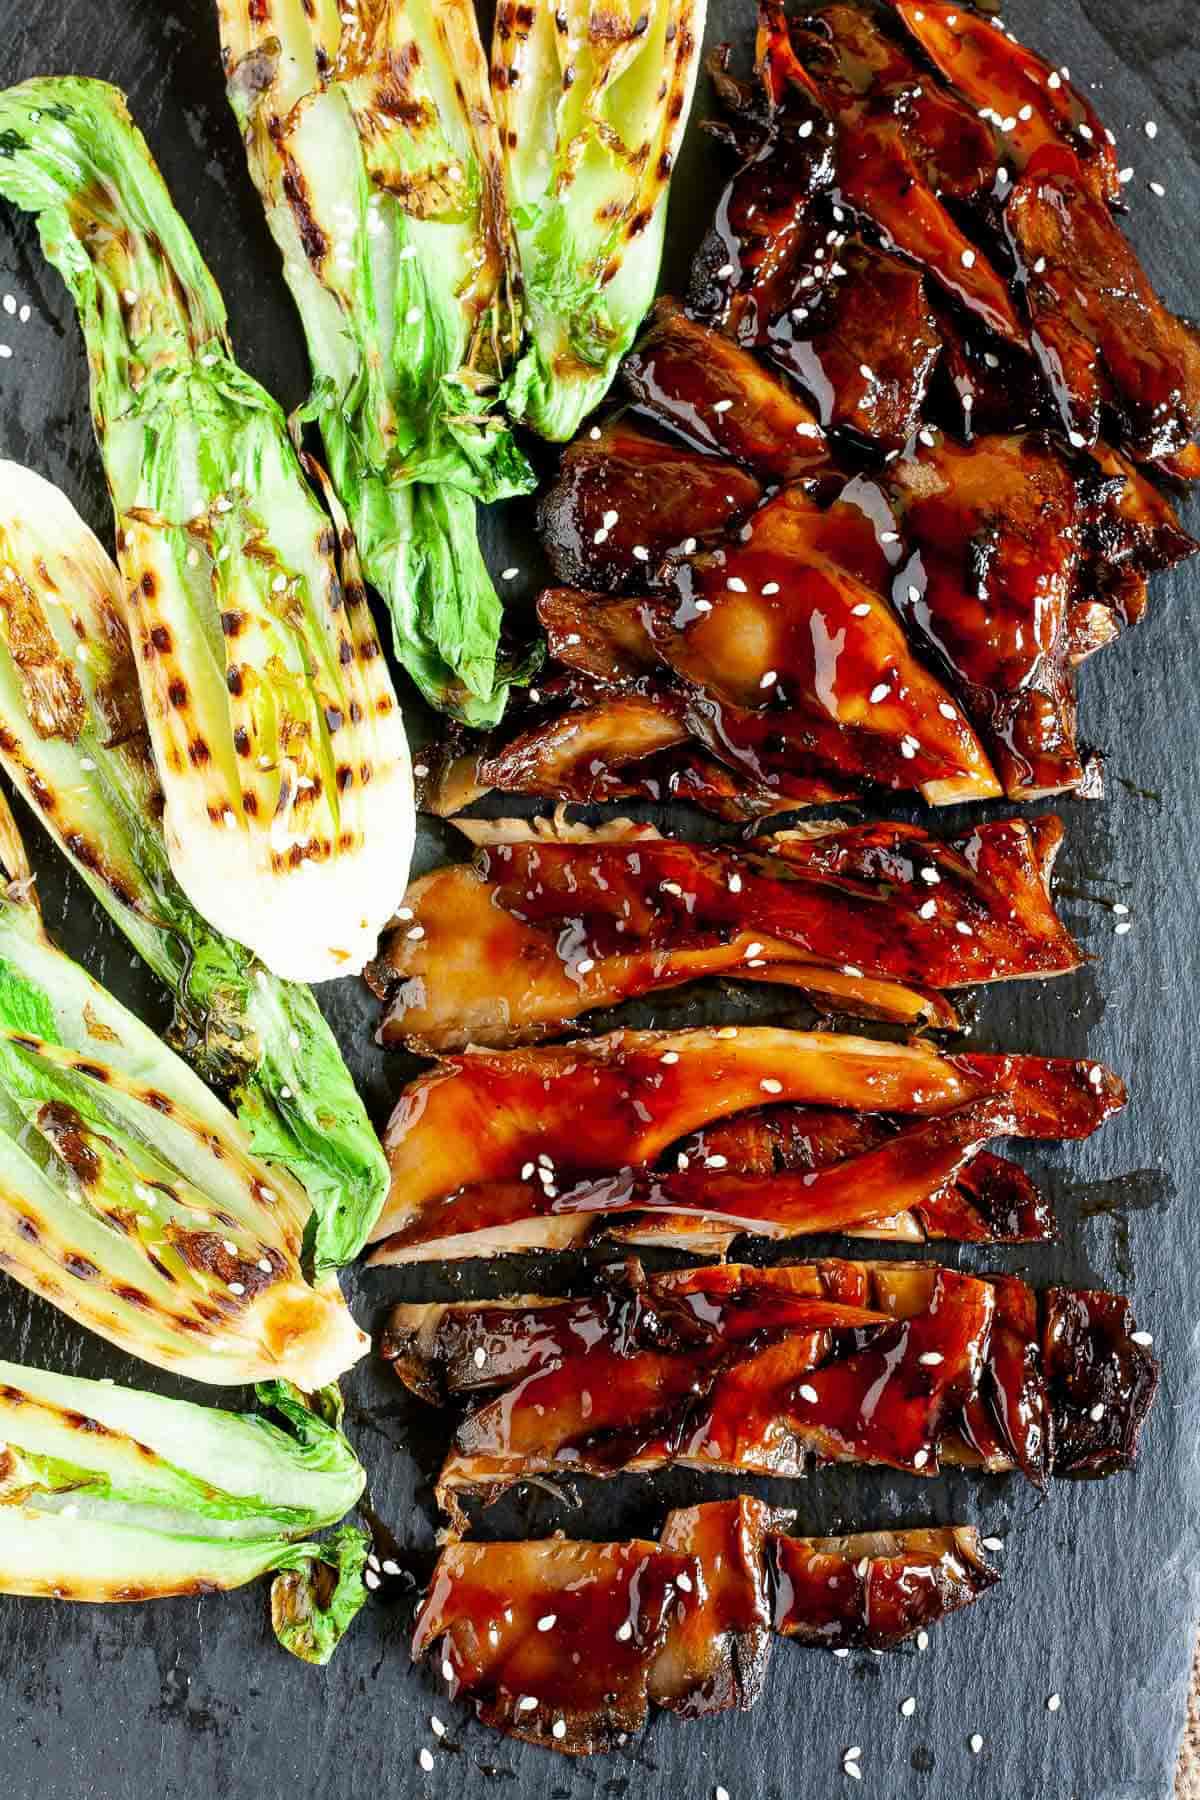 Grilled oyster mushroom steak on a plate with grilled bok choy.